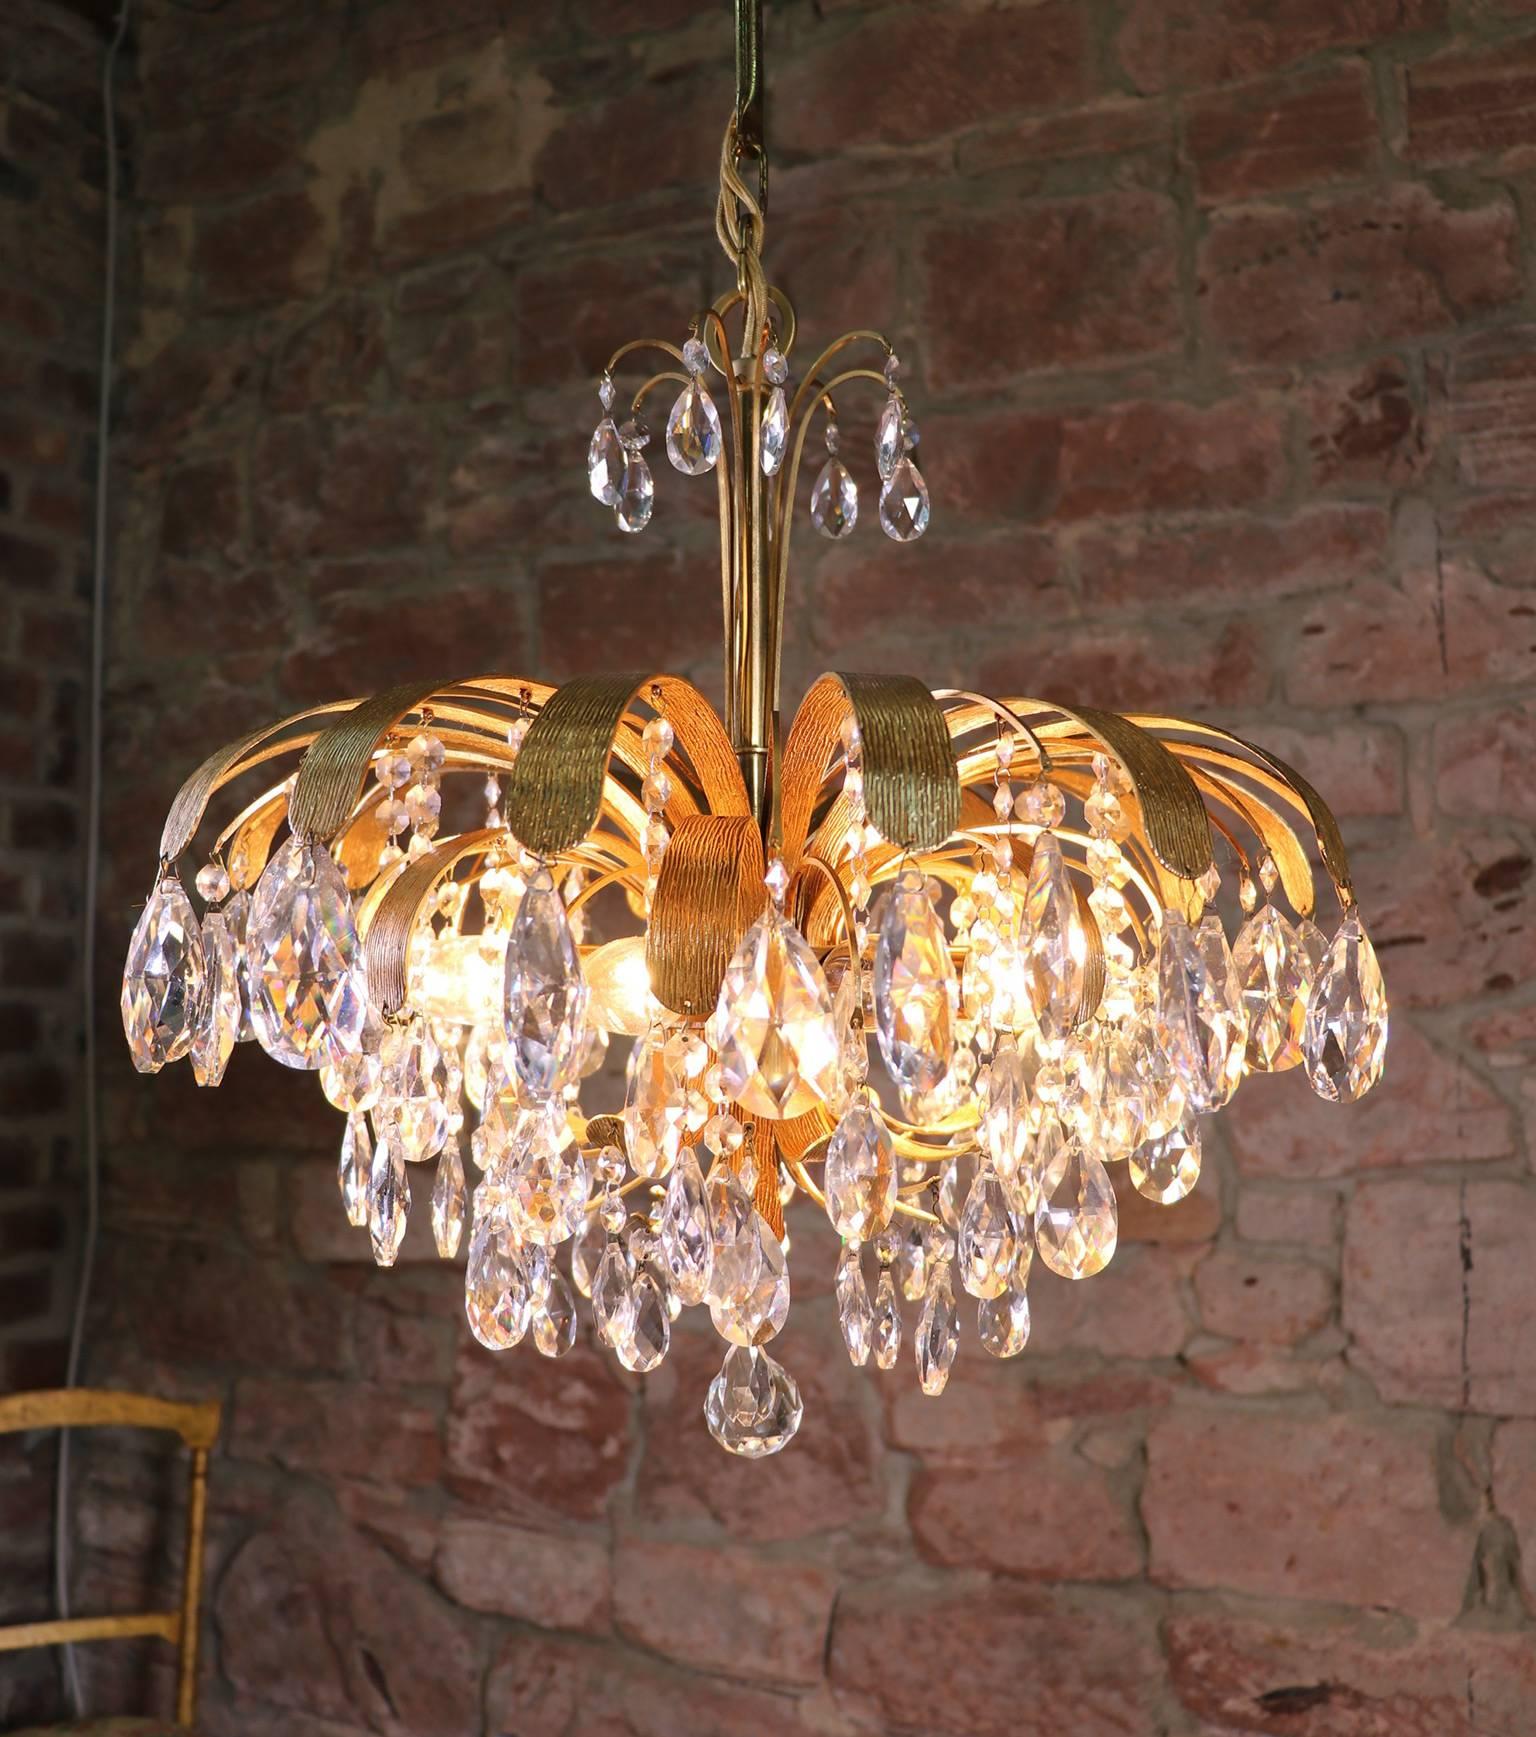 Beautiful cascading gilt brass leaf crystal chandelier made by Palwa, Germany in the 1960s.
Original wiring with 8 small Edison bulbs.